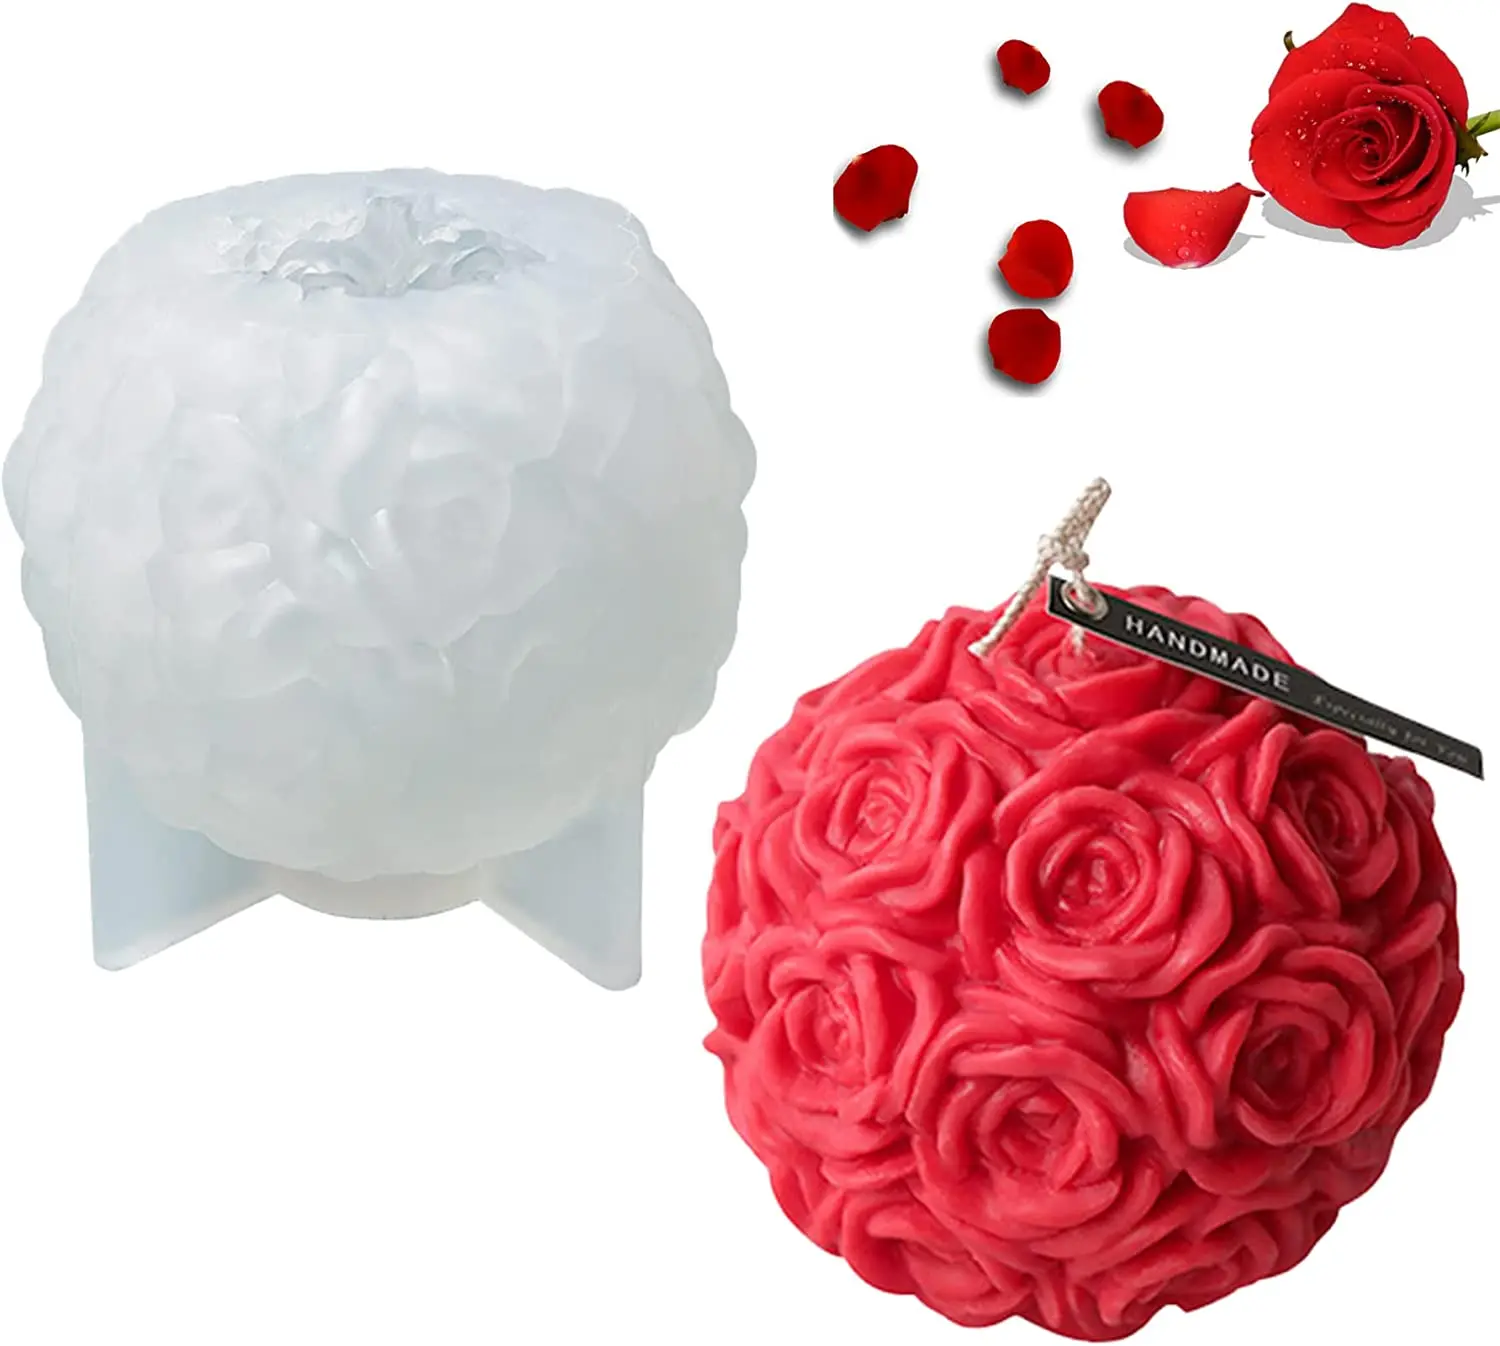 Silicone Candle Molds 3D Rose Flowers Resin Casting Mold for DIY Candle Making Homemade Soap Polymer Clay Craft Plaster